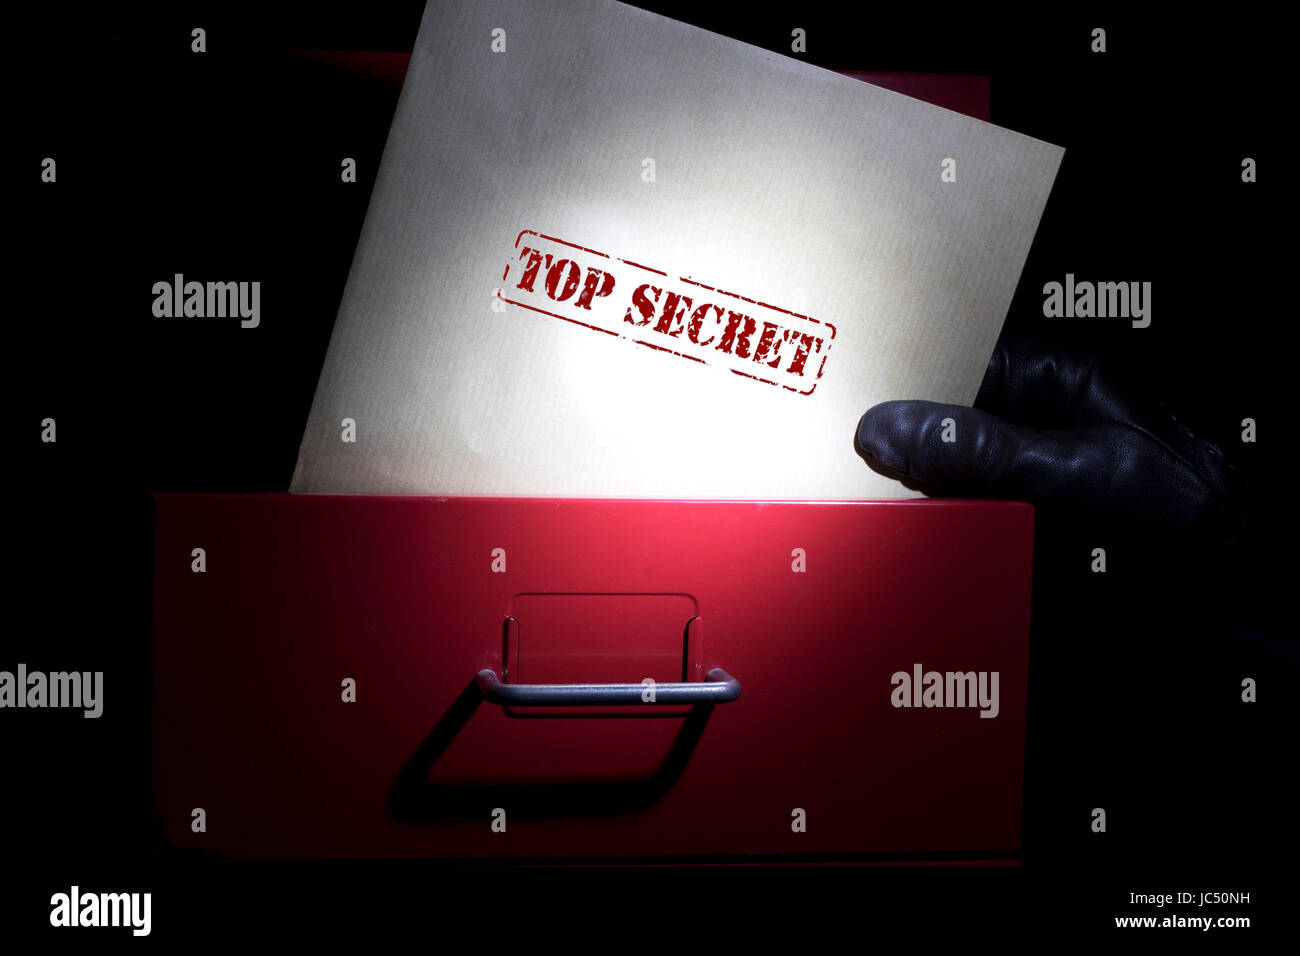 Looking for top secret documents in a dark. Stock Photo